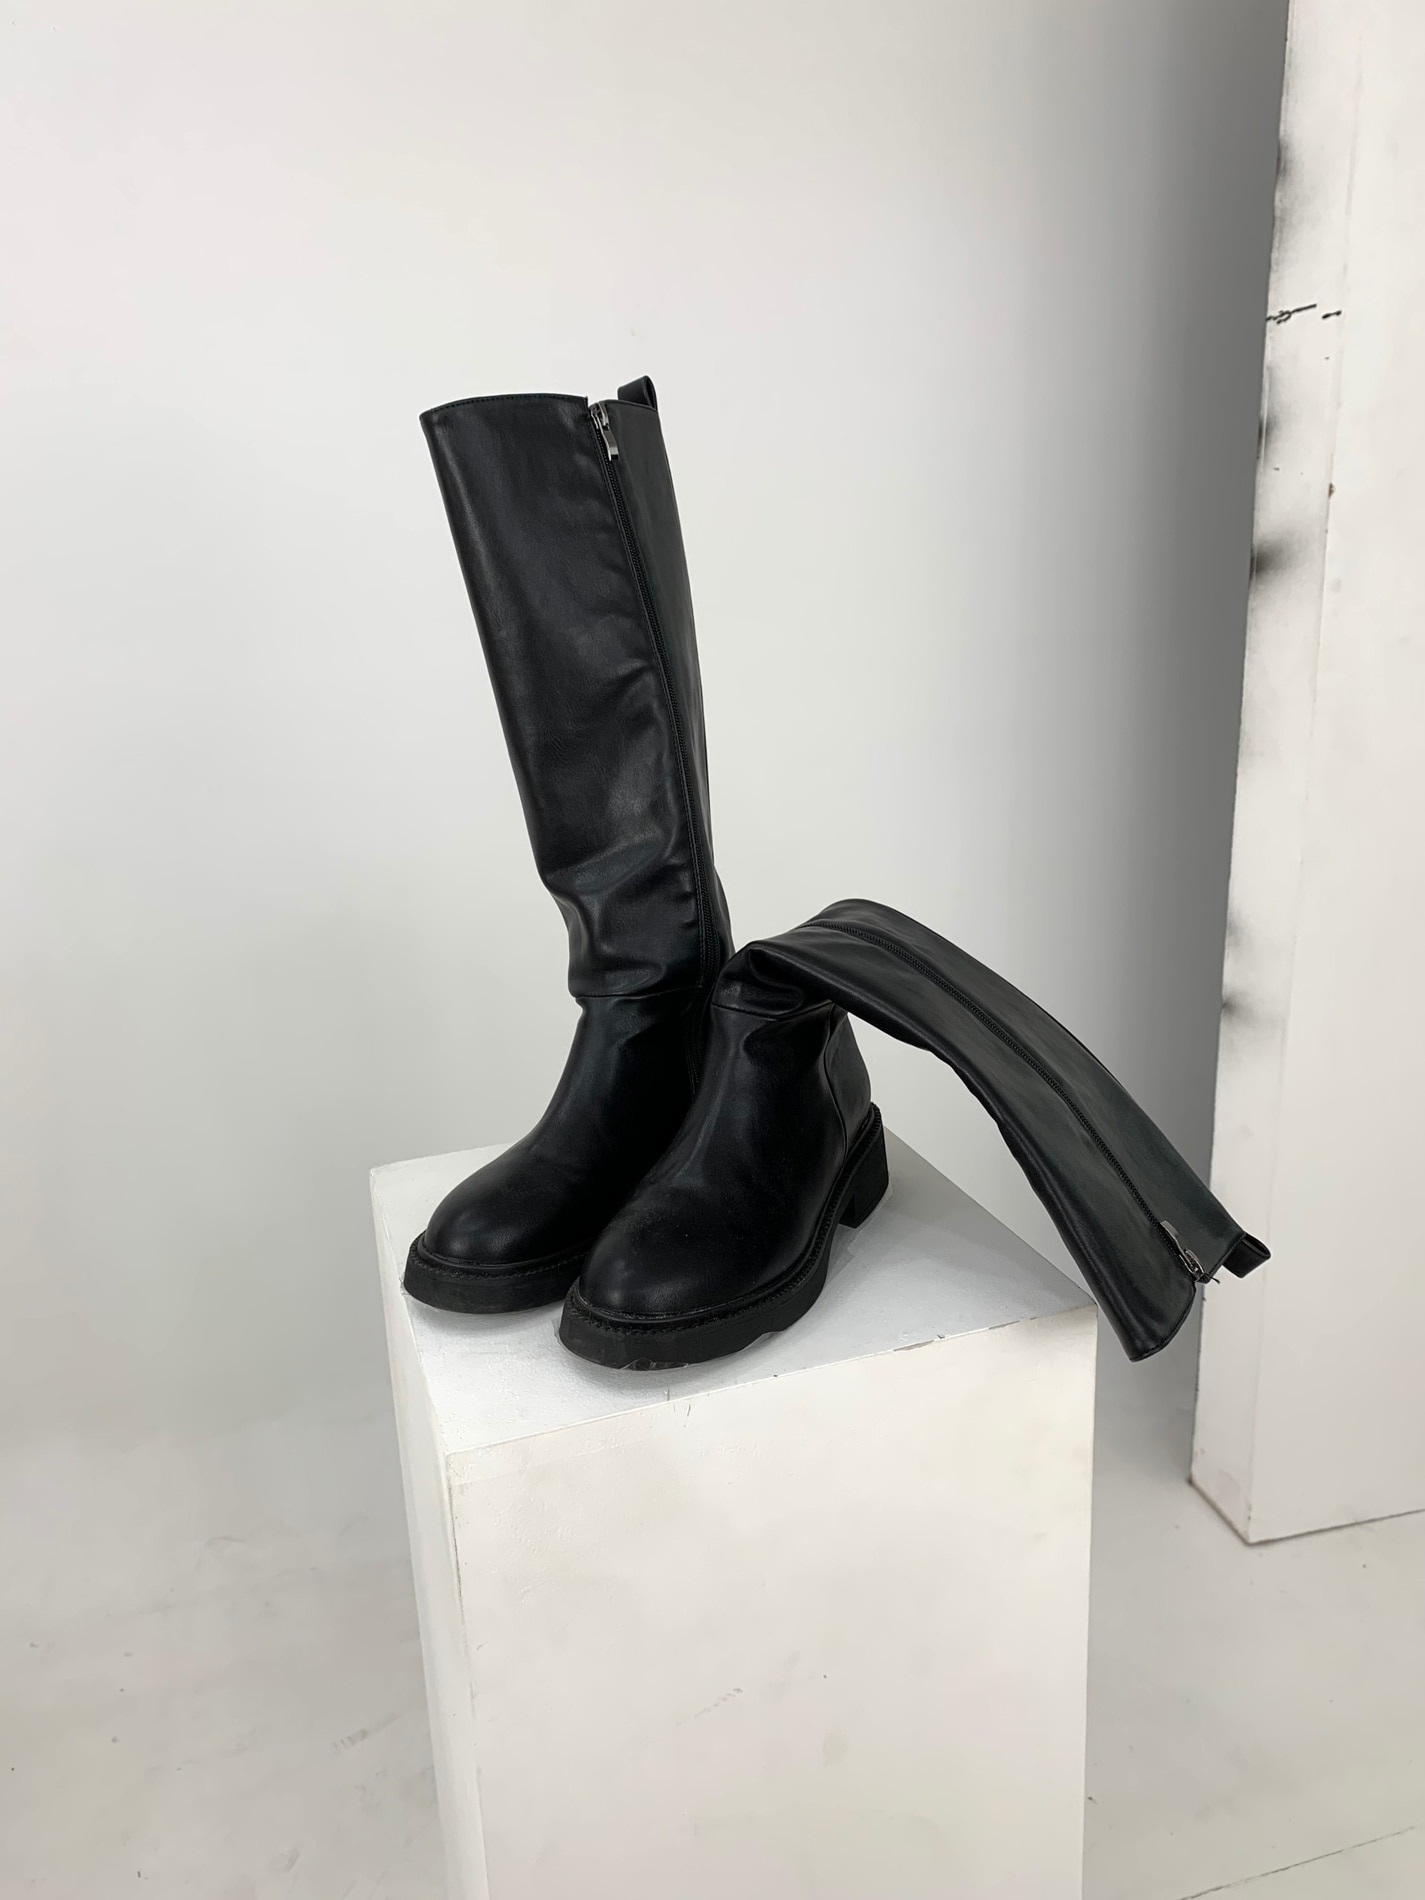 rounded leather long boots